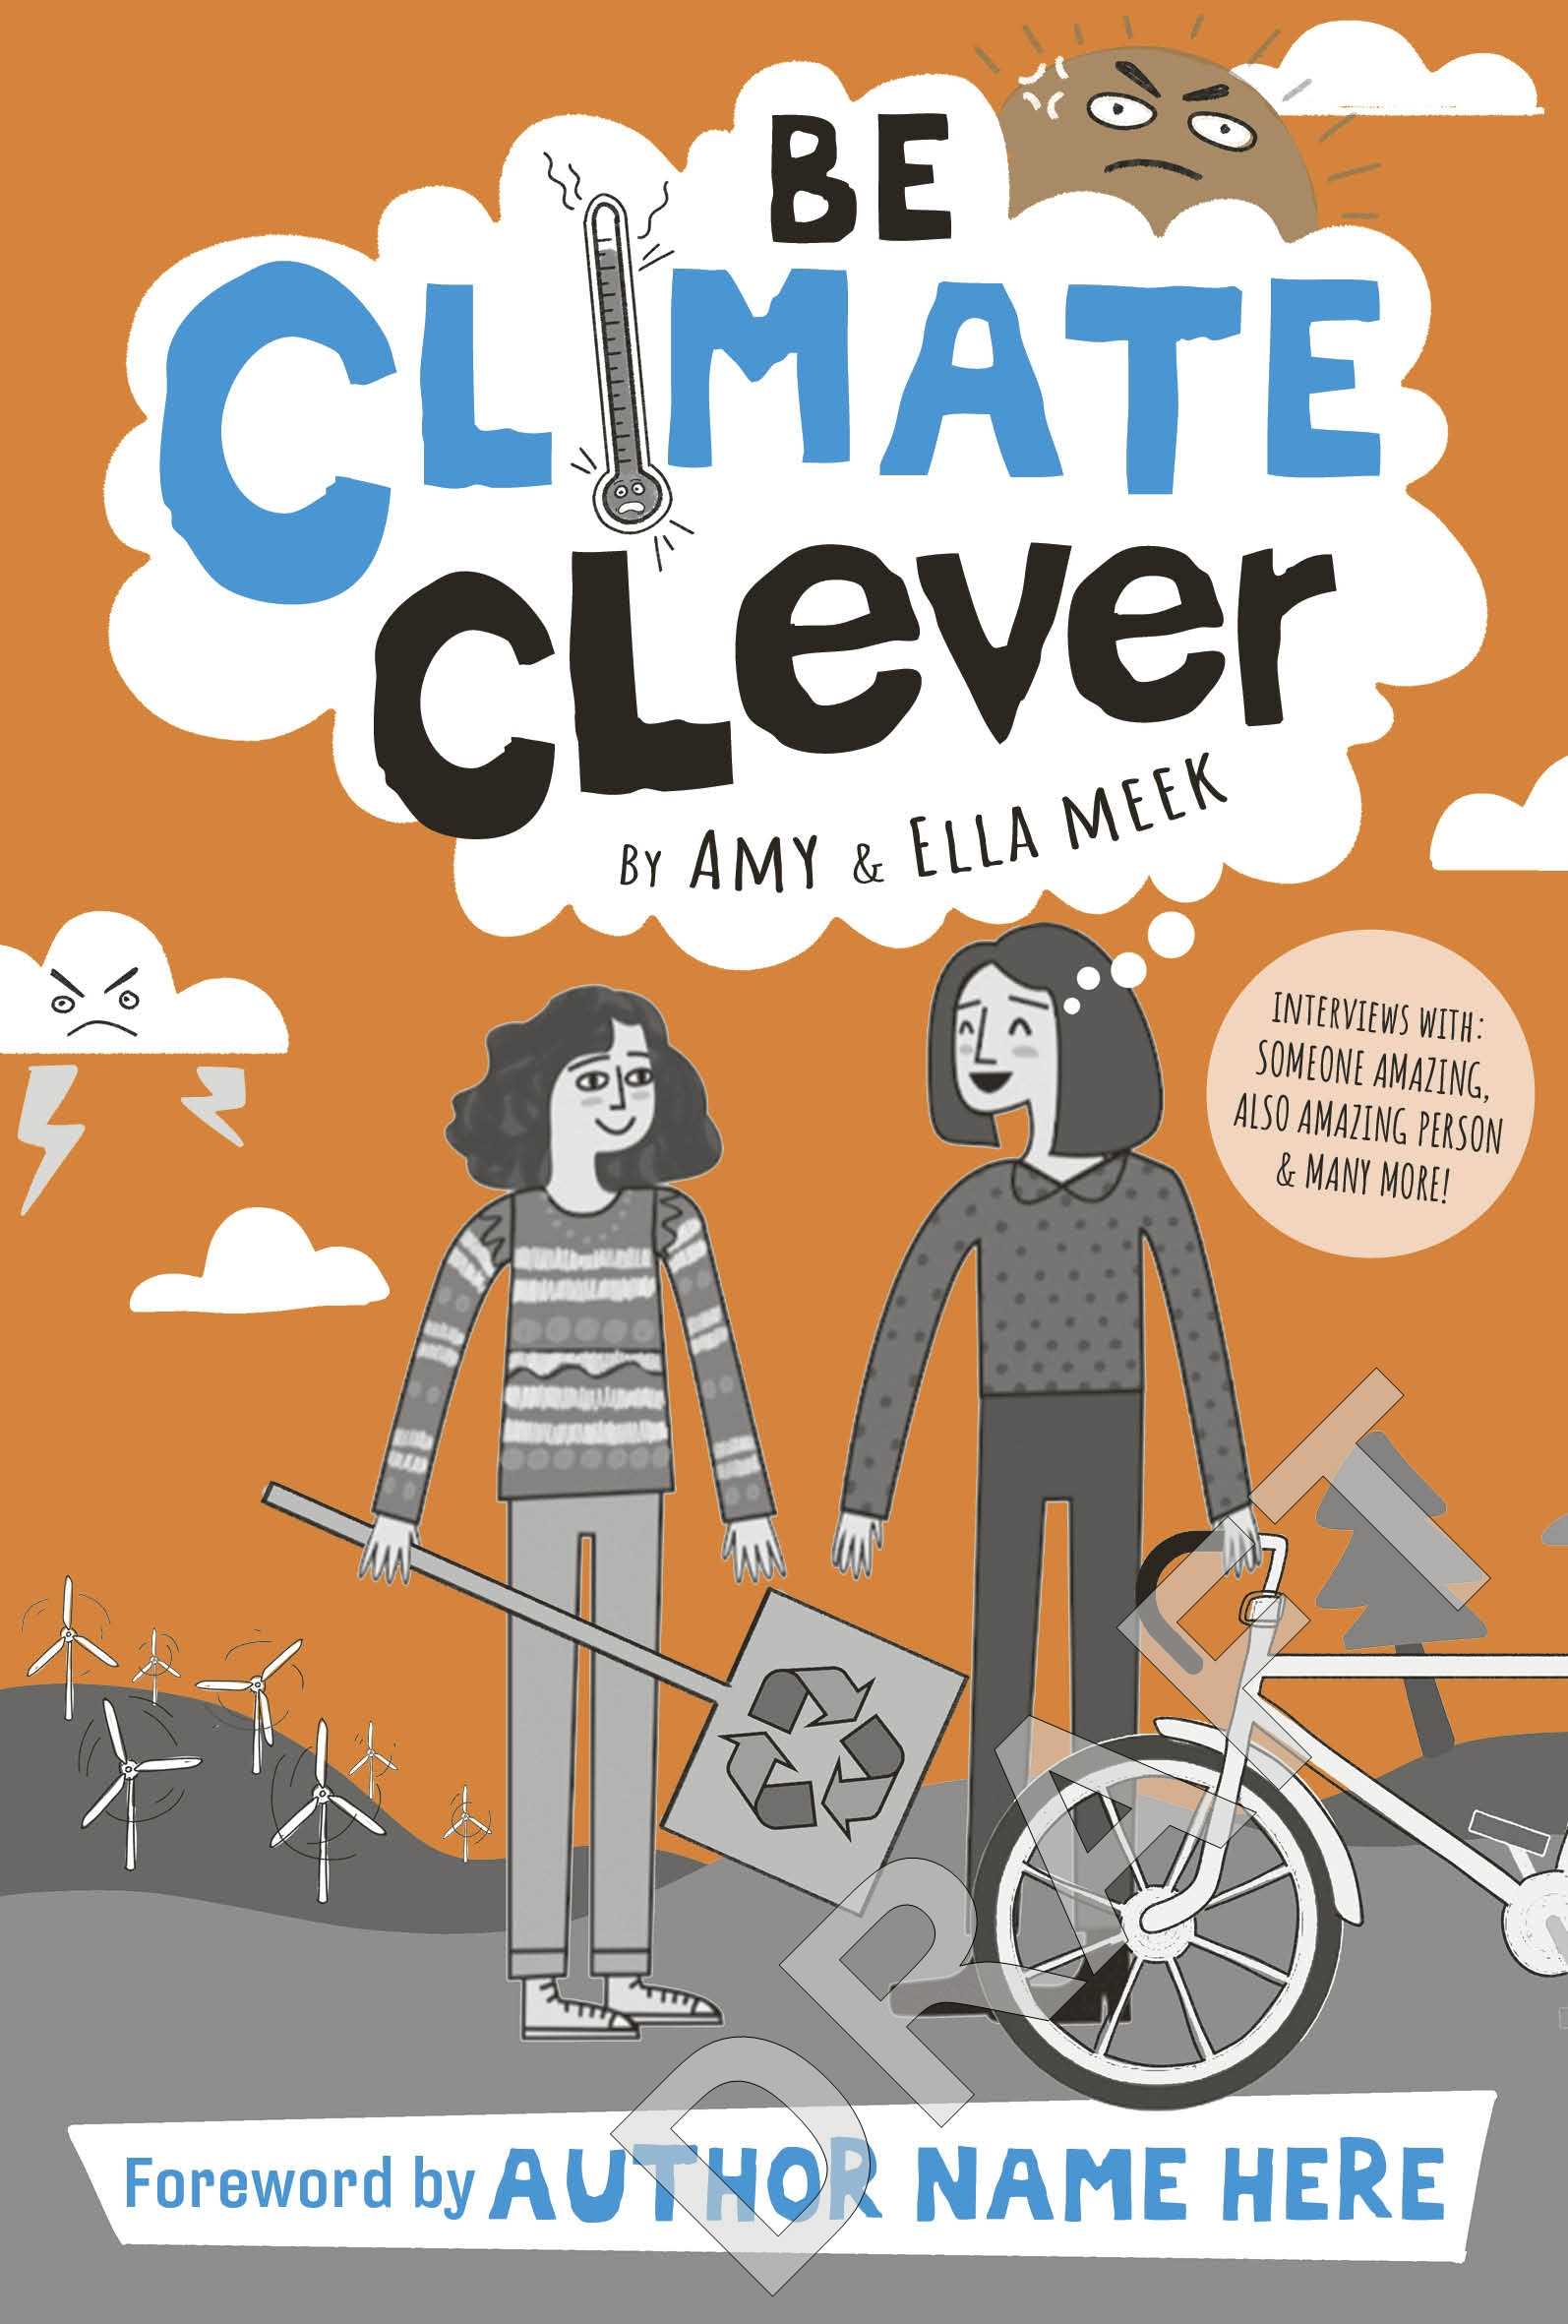 Be Climate Clever